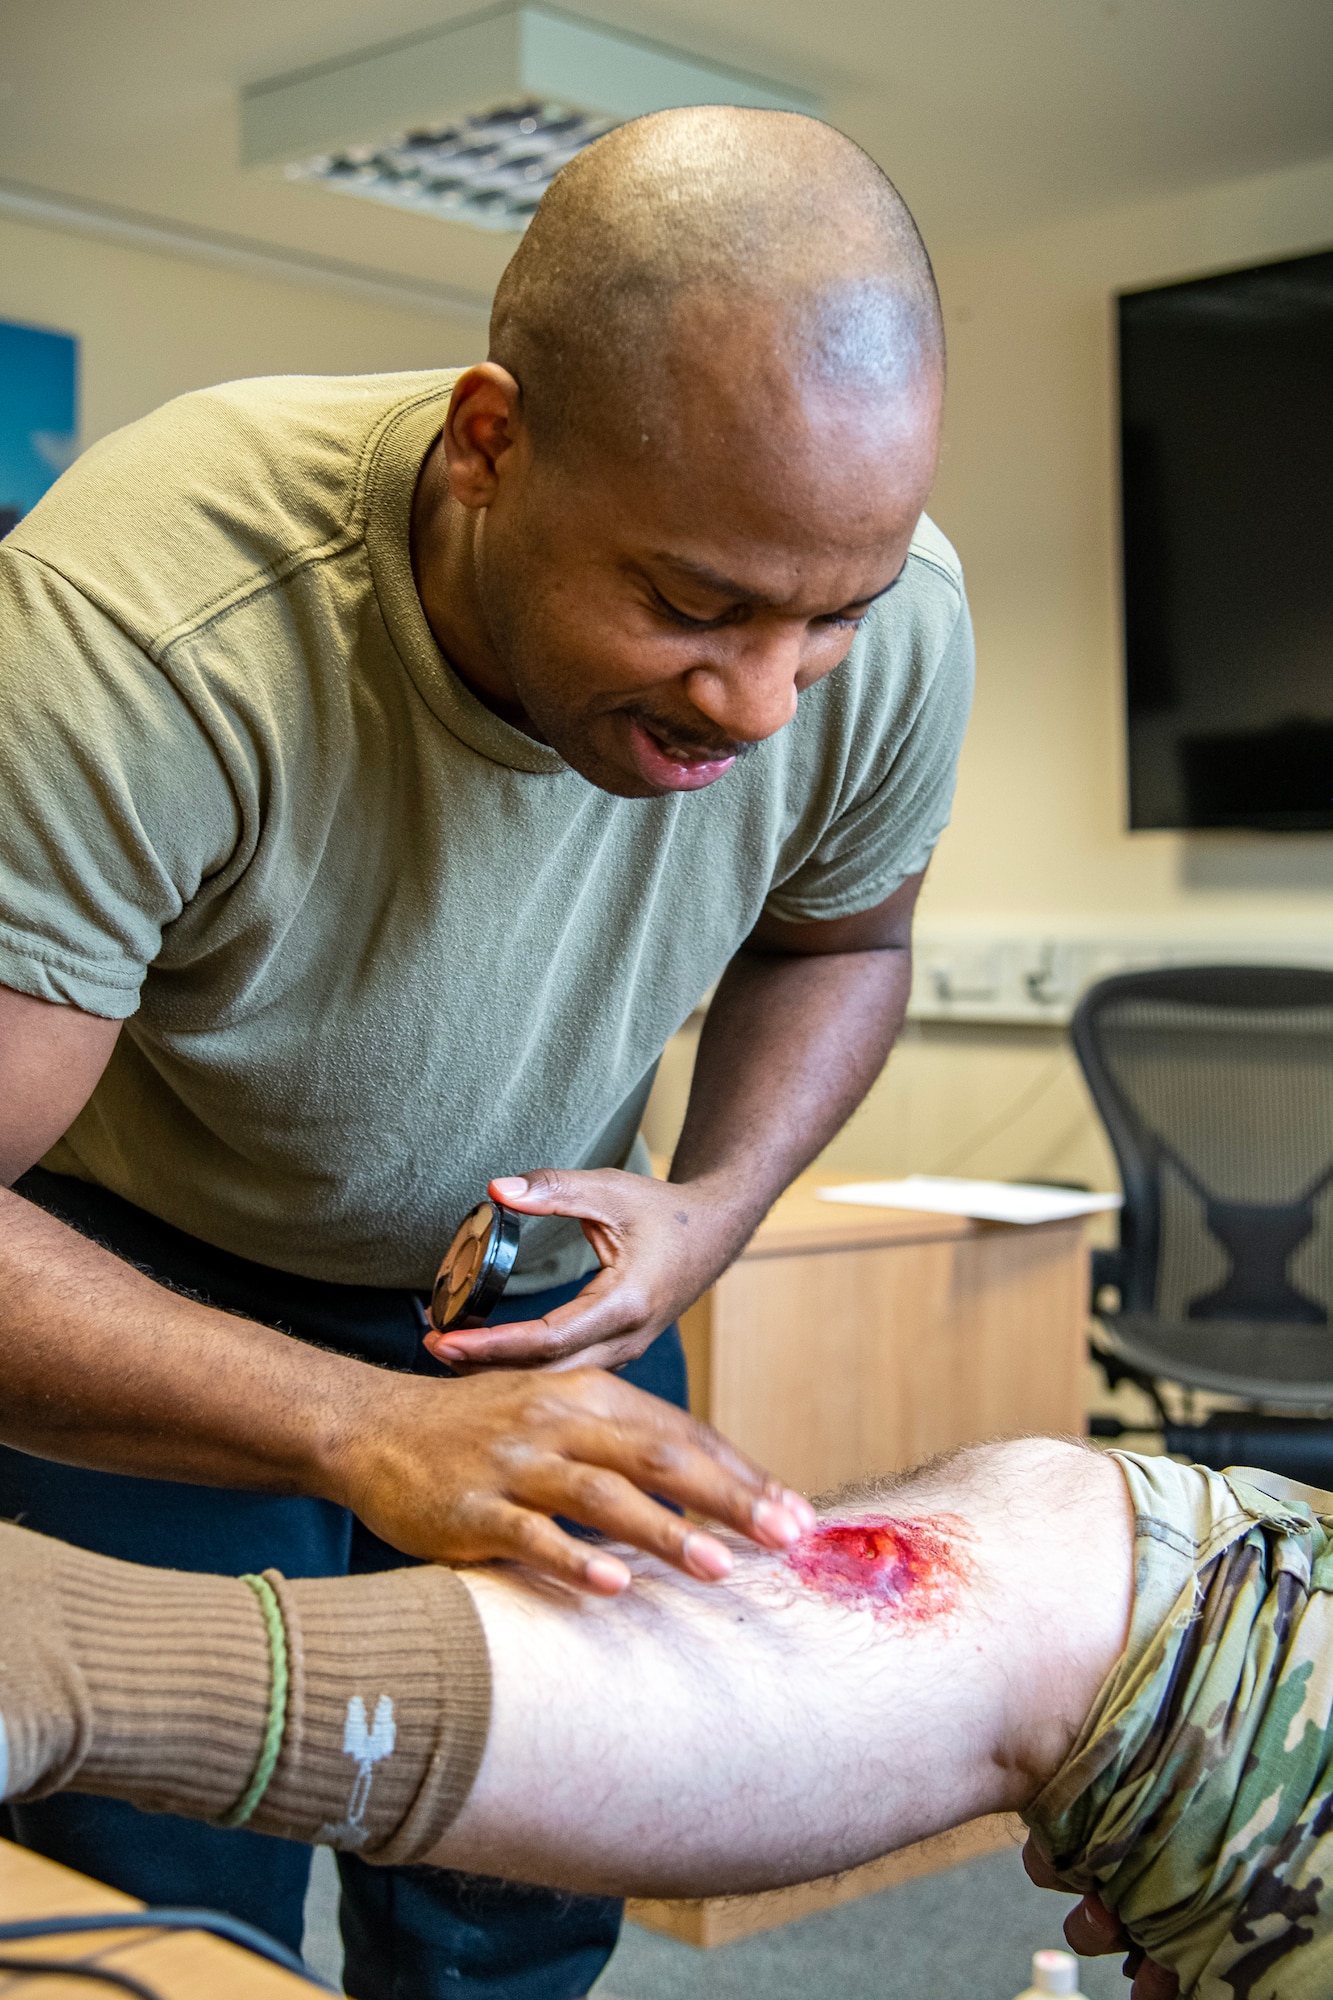 U.S. Air Force Tech Sgt. Dominique Lockley, 501st Combat Support Wing executive assistant to the Command Chief, applies moulage to a simulated victim at RAF Alconbury, England, March 16, 2023. The application was part of an exercise which tested the 501st CSW on overall readiness and ability to respond to an emergency situation. (U.S. Air Force photo by Staff Sgt. Eugene Oliver)